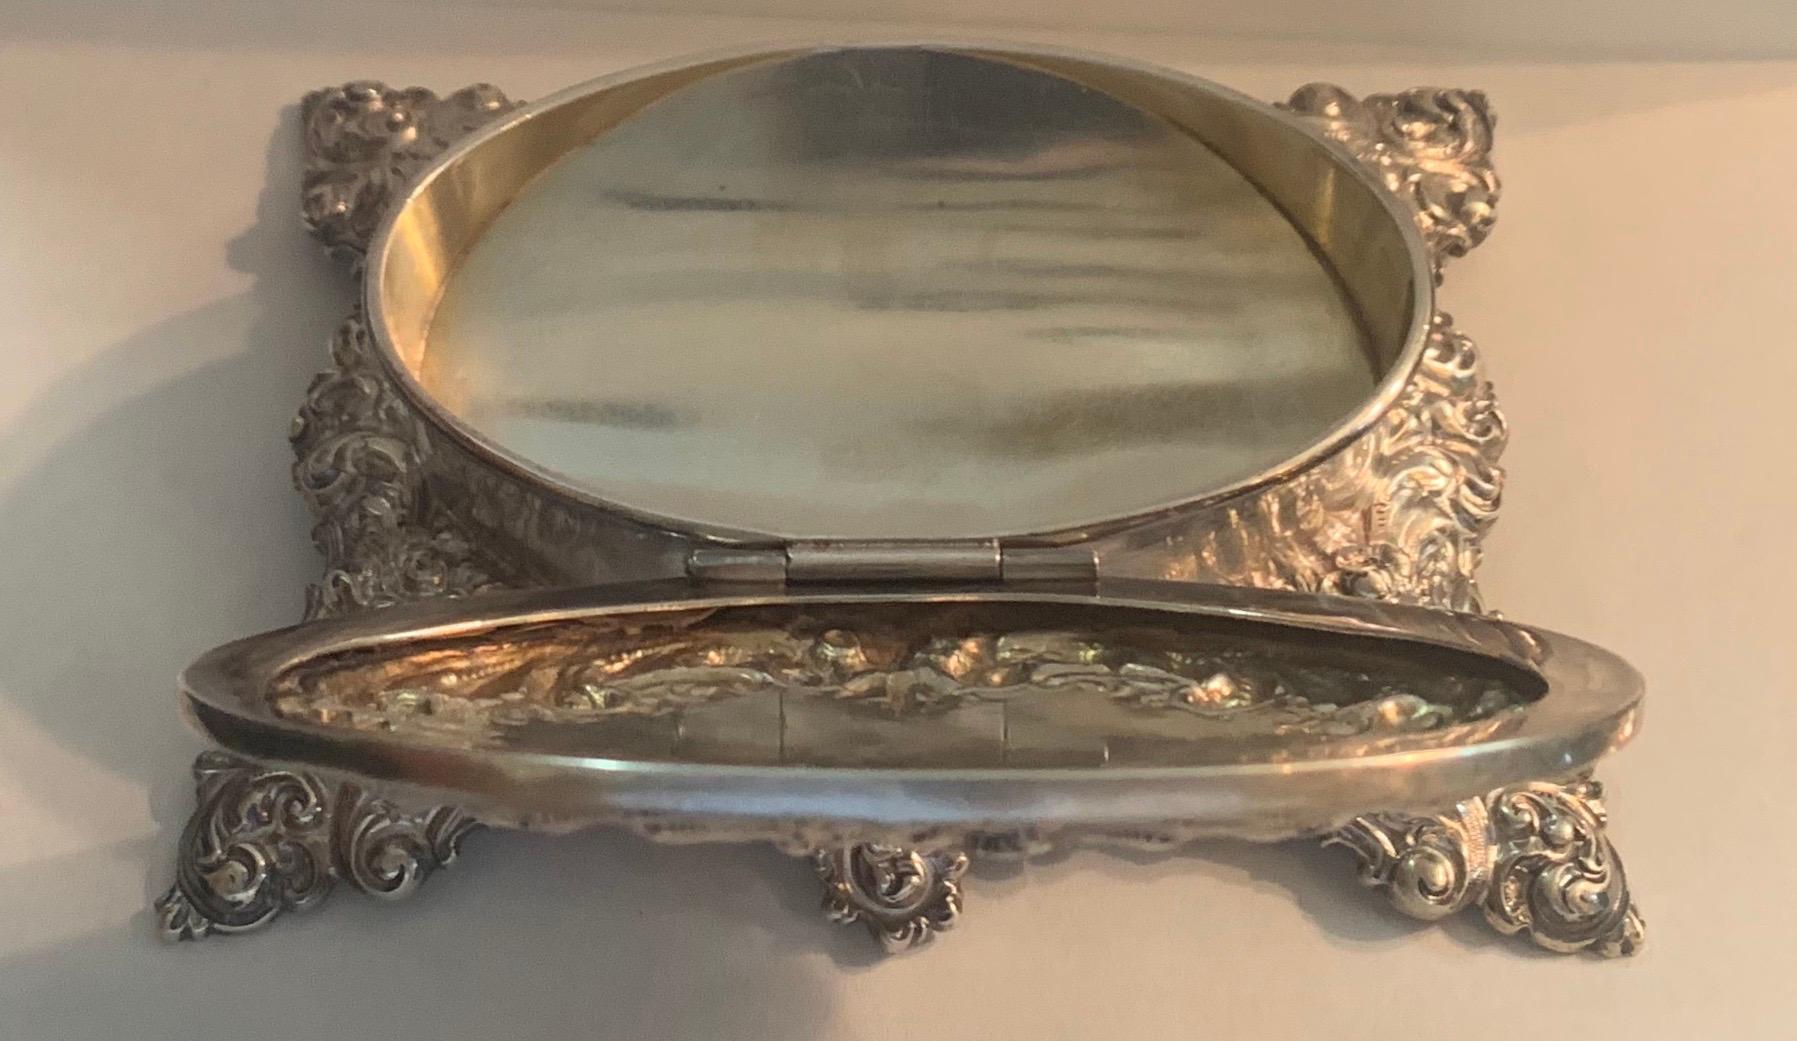 North American Wonderful Bailey Banks Biddle Company Sterling Oval Jewelry Keepsake Footed Box For Sale